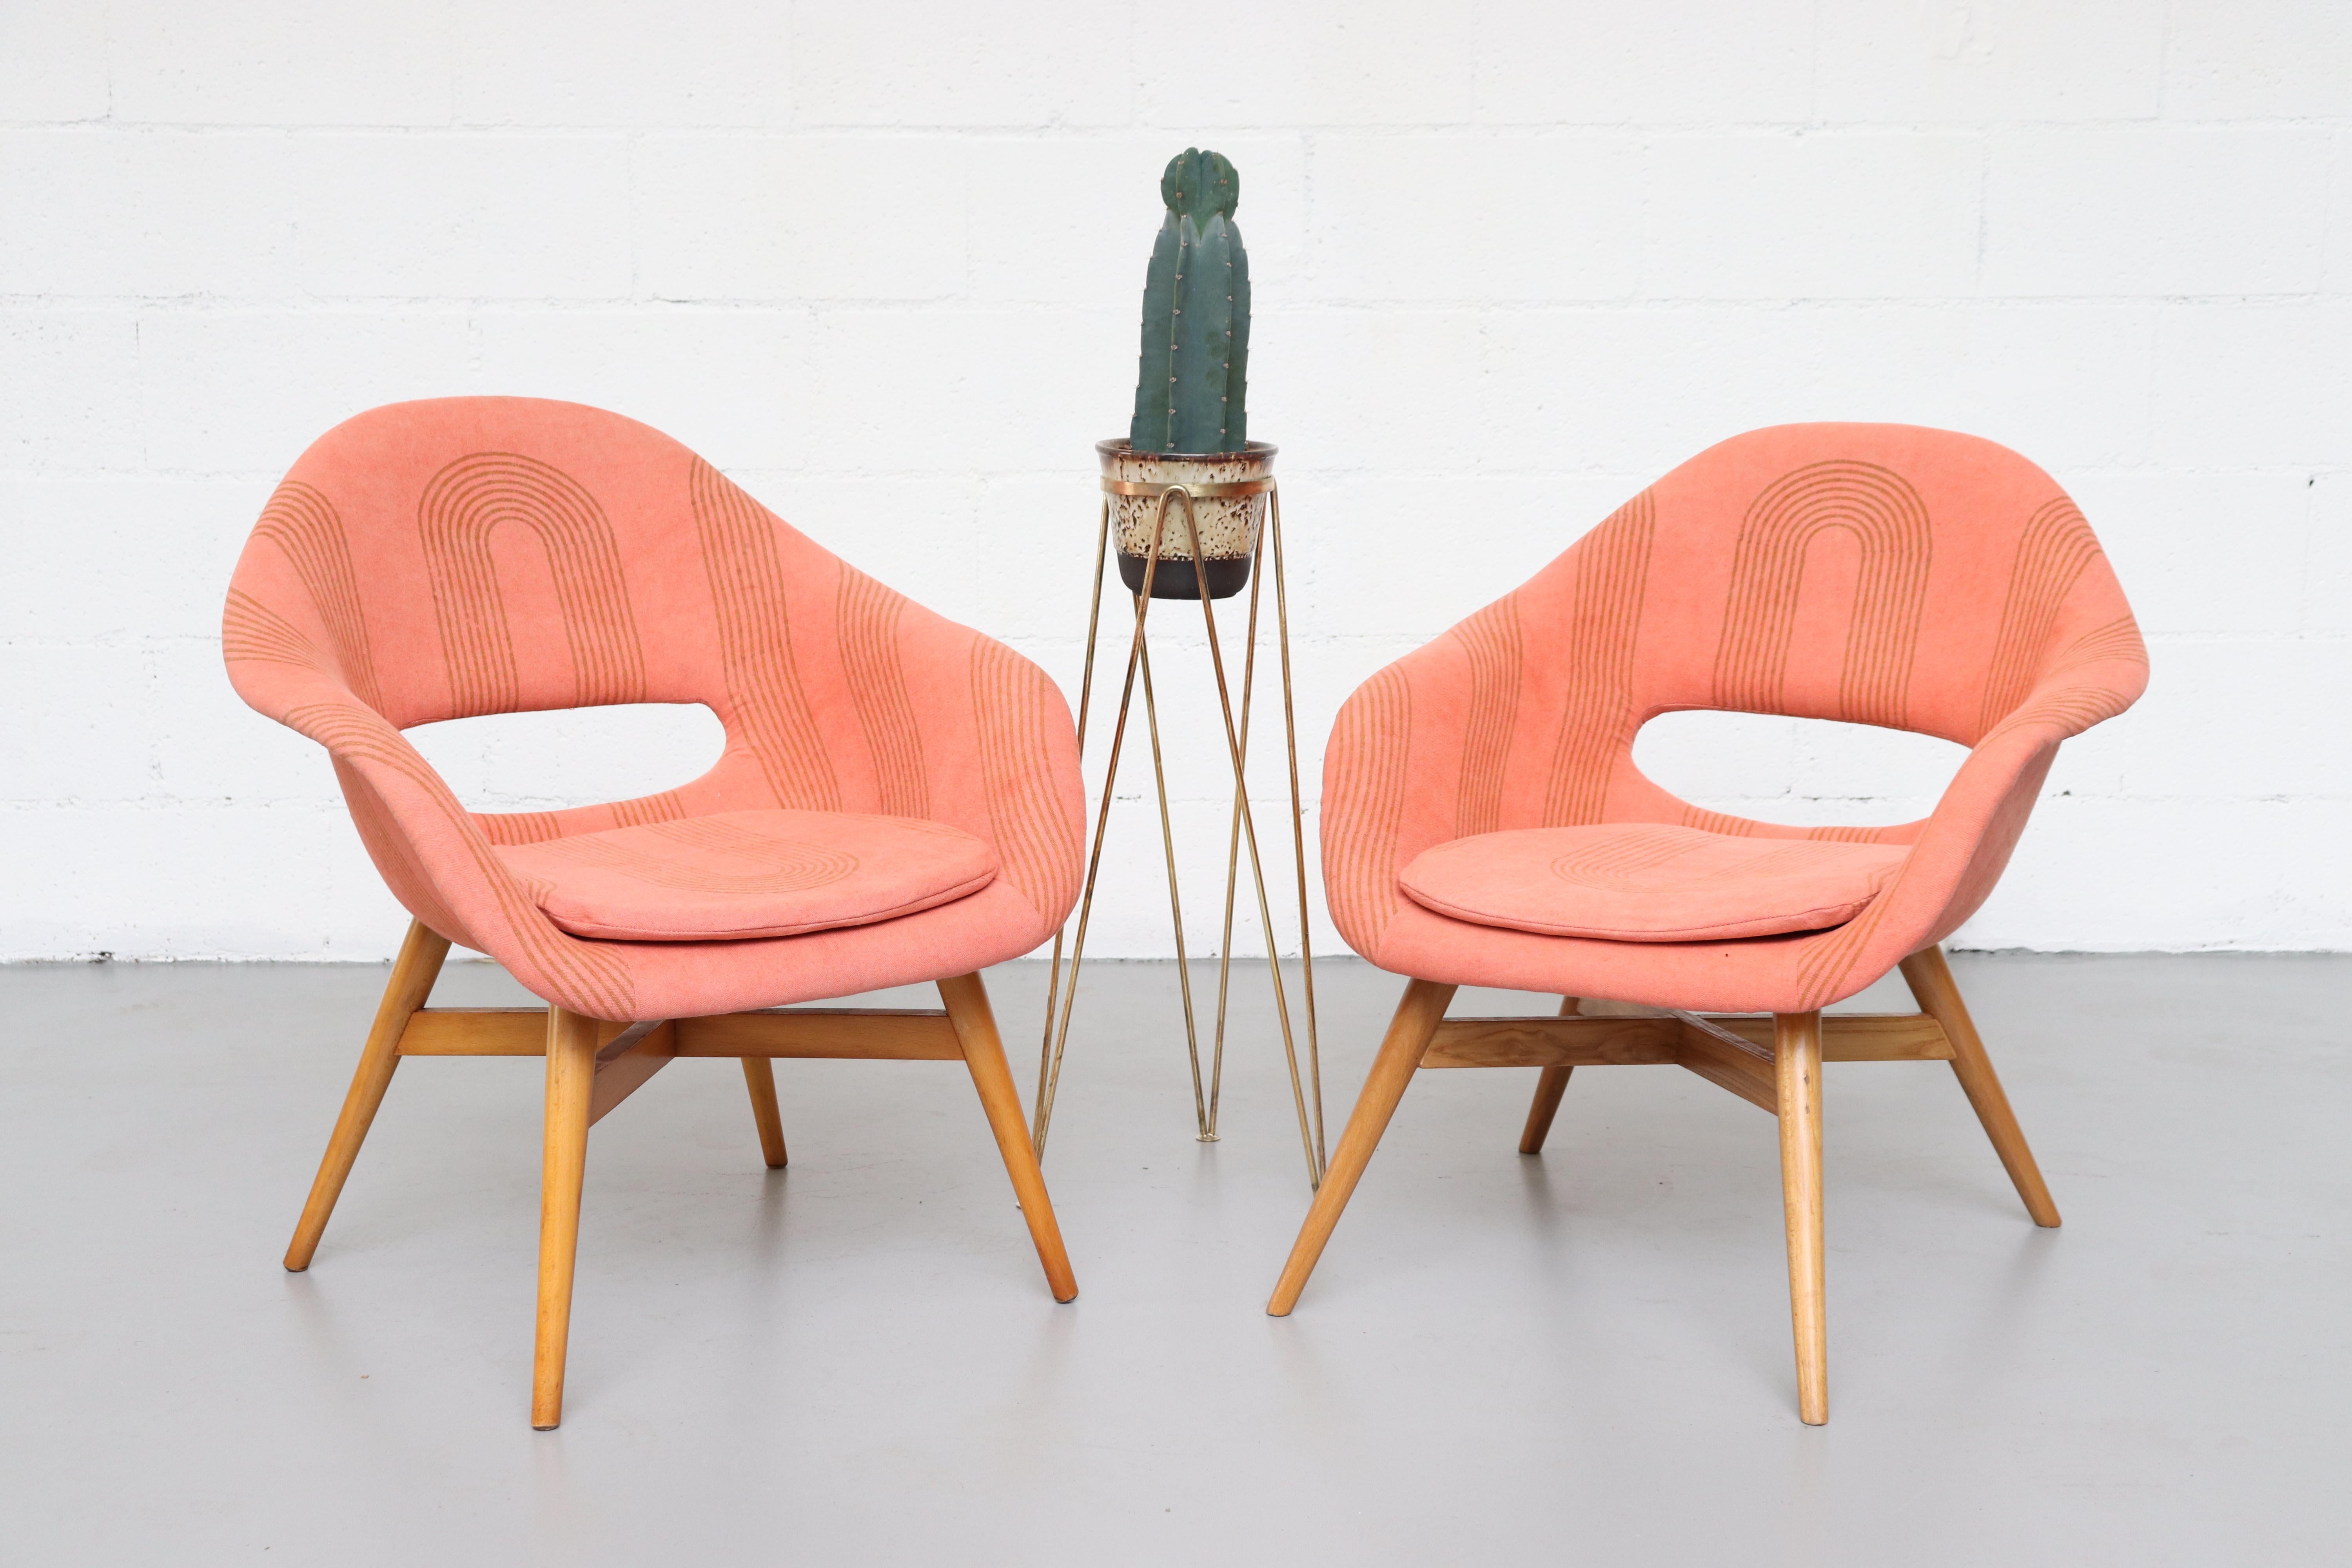 Part of our special limited edition collaboration with Los Angeles textile studio Block Shop Textiles. Saarinen-style Miroslav Navrátil bucket chairs with unique cutout detail, manufactured by Vertex, 1960s. Newly upholstered in custom hand block